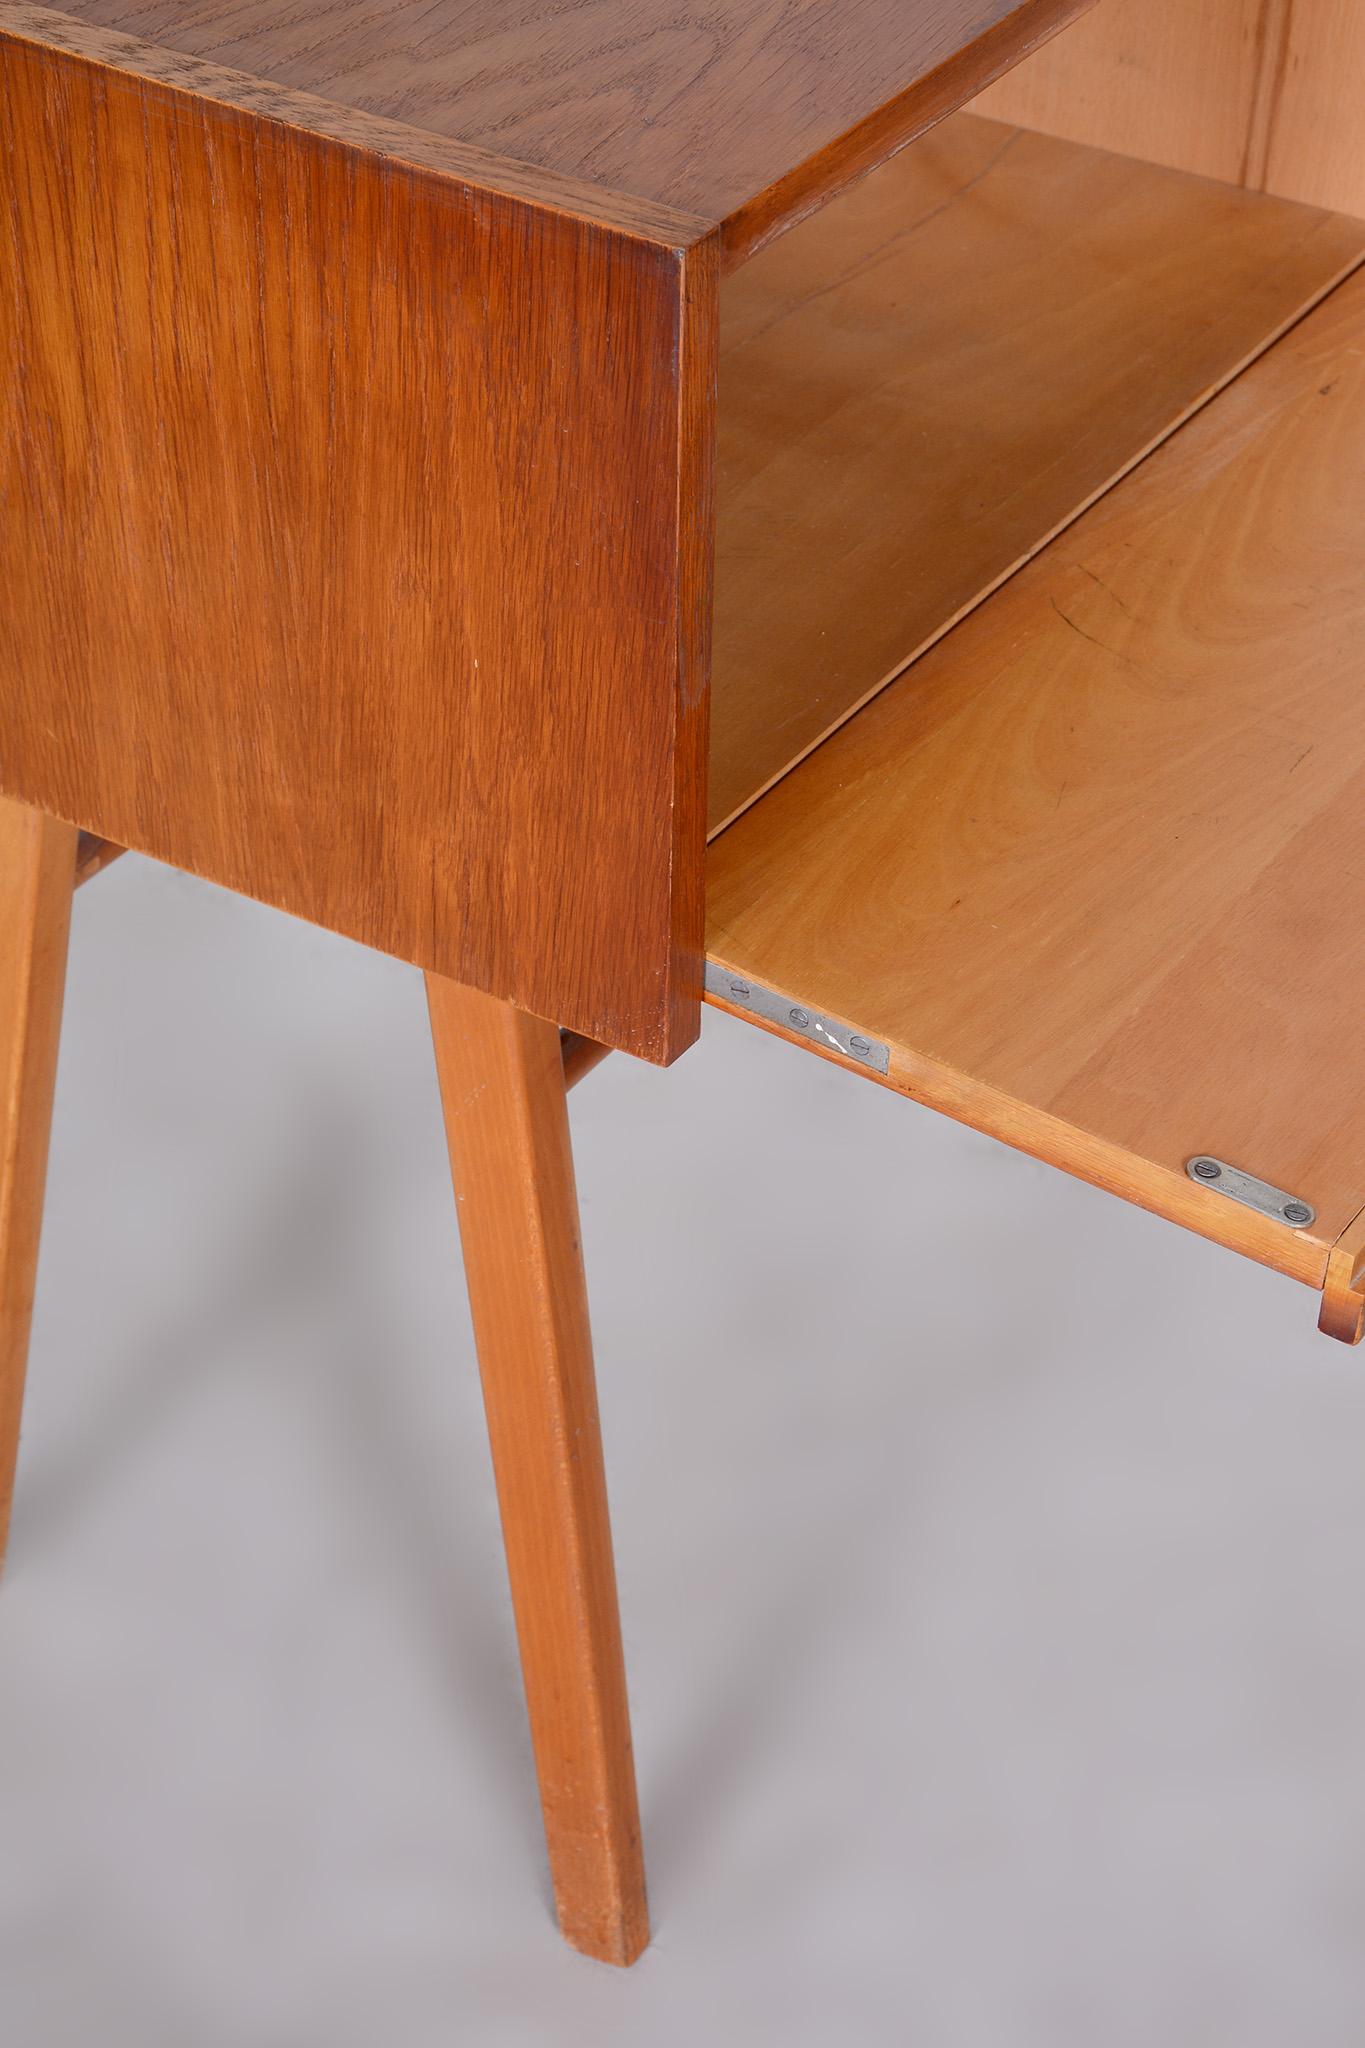 Czech Mid-Century Side Table, Cabinet Made Out of Oak, 1950s, Refreshed Polish In Good Condition For Sale In Horomerice, CZ